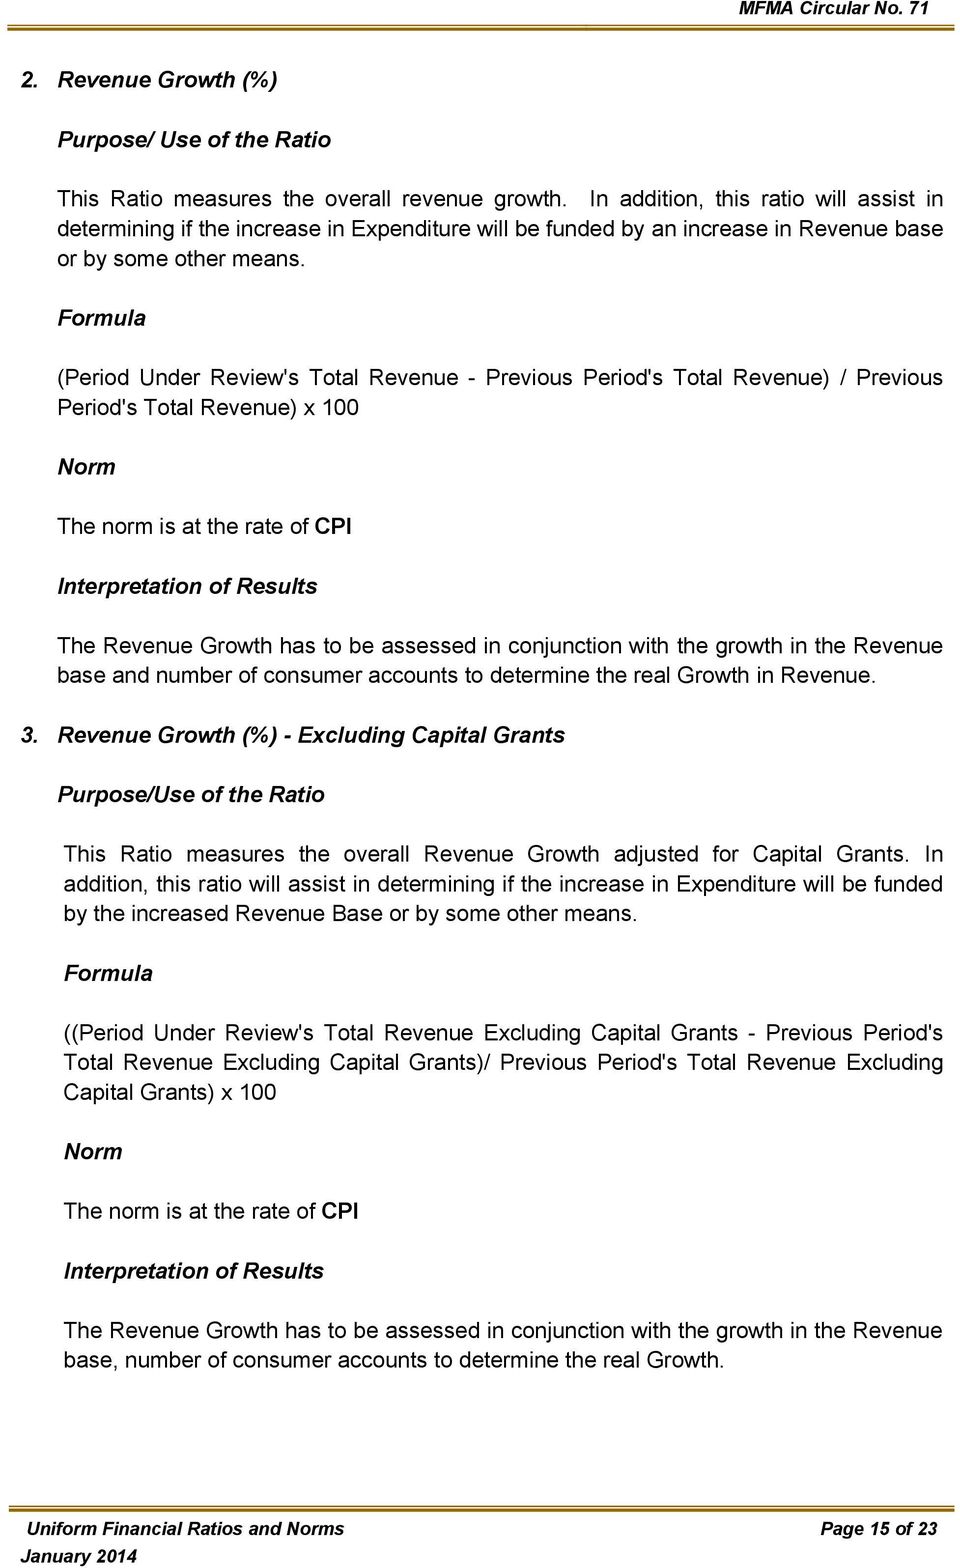 (Period Under Review's Total Revenue - Previous Period's Total Revenue) / Previous Period's Total Revenue) x 100 The norm is at the rate of CPI The Revenue Growth has to be assessed in conjunction